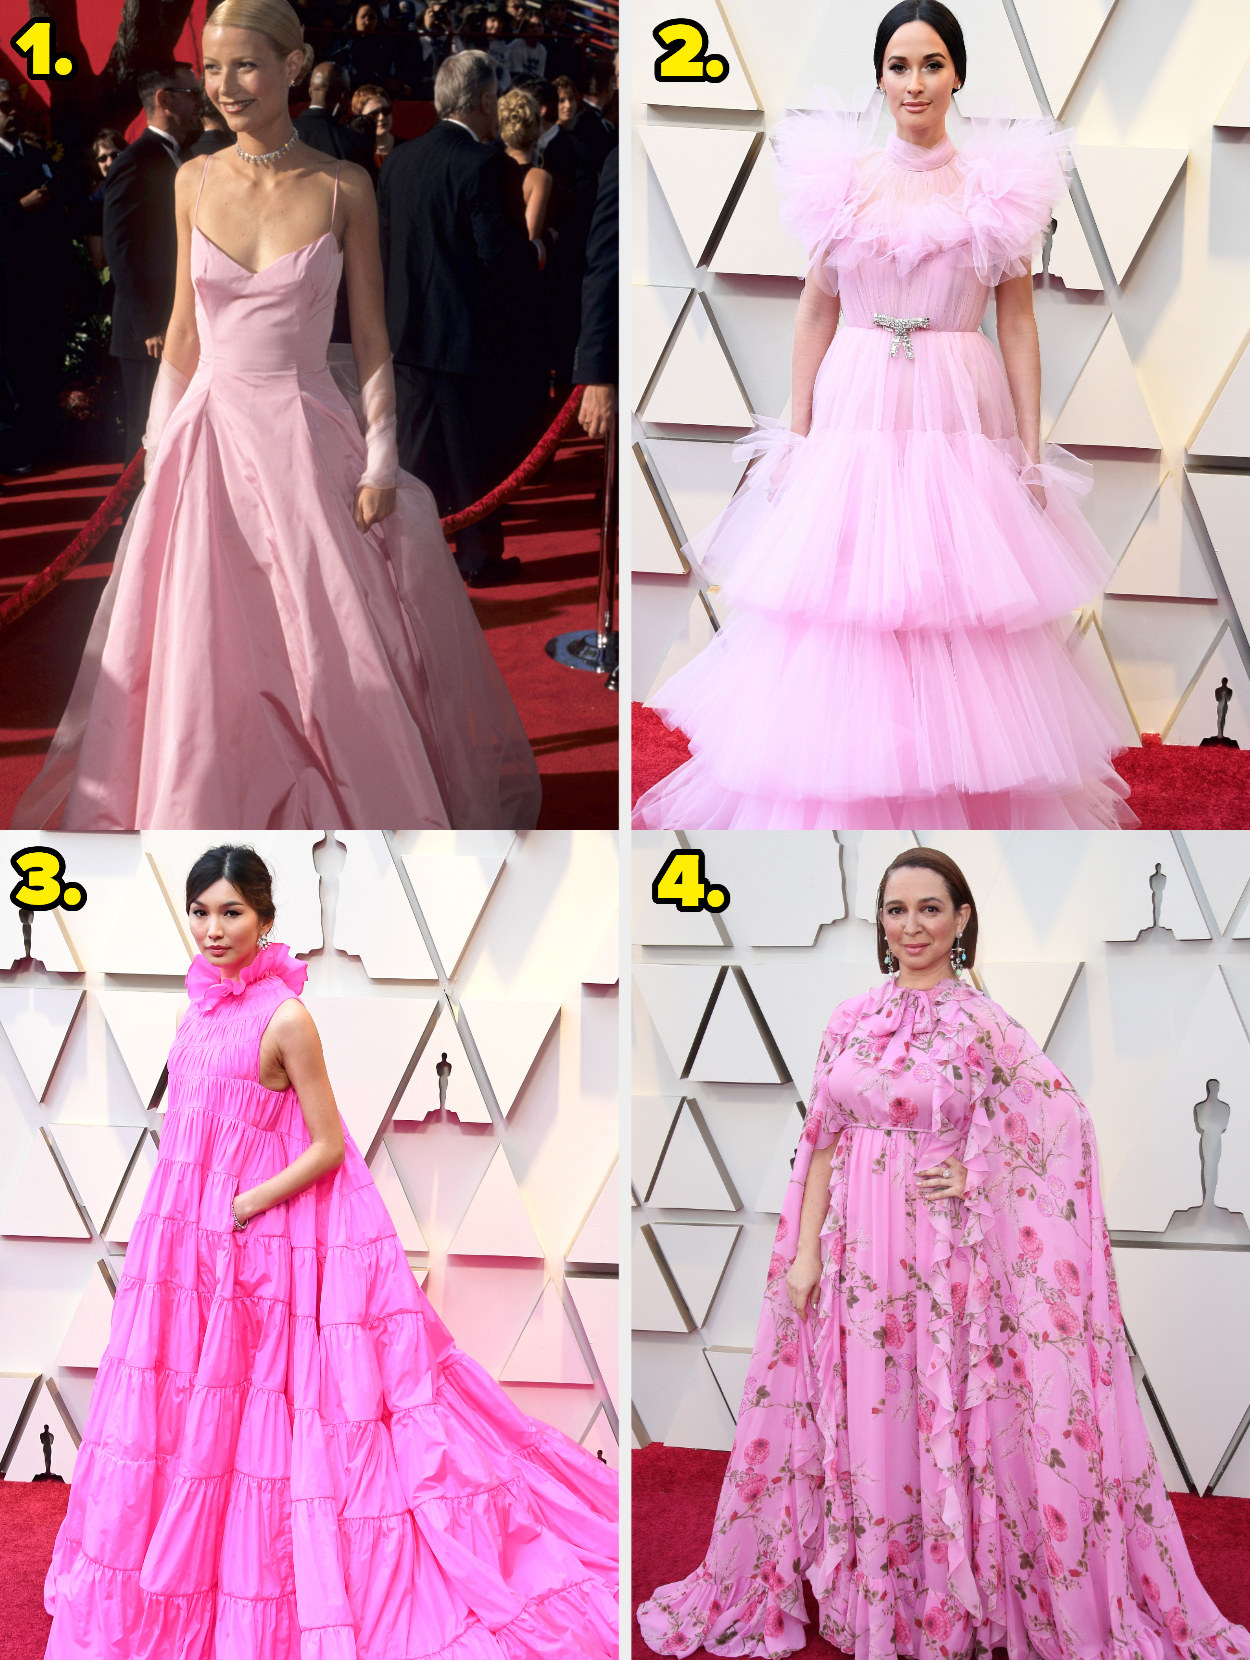 1. Gwyneth Paltrow wears a simple sleek gown. 2. Kacey Musgraves wears a tiered gown with giant tulle layers 3. Gemma Chan wears a turtle neck gown that mimics a tent. 4. Maya Rudolph wears a gown with a cape and its all covered in flowers